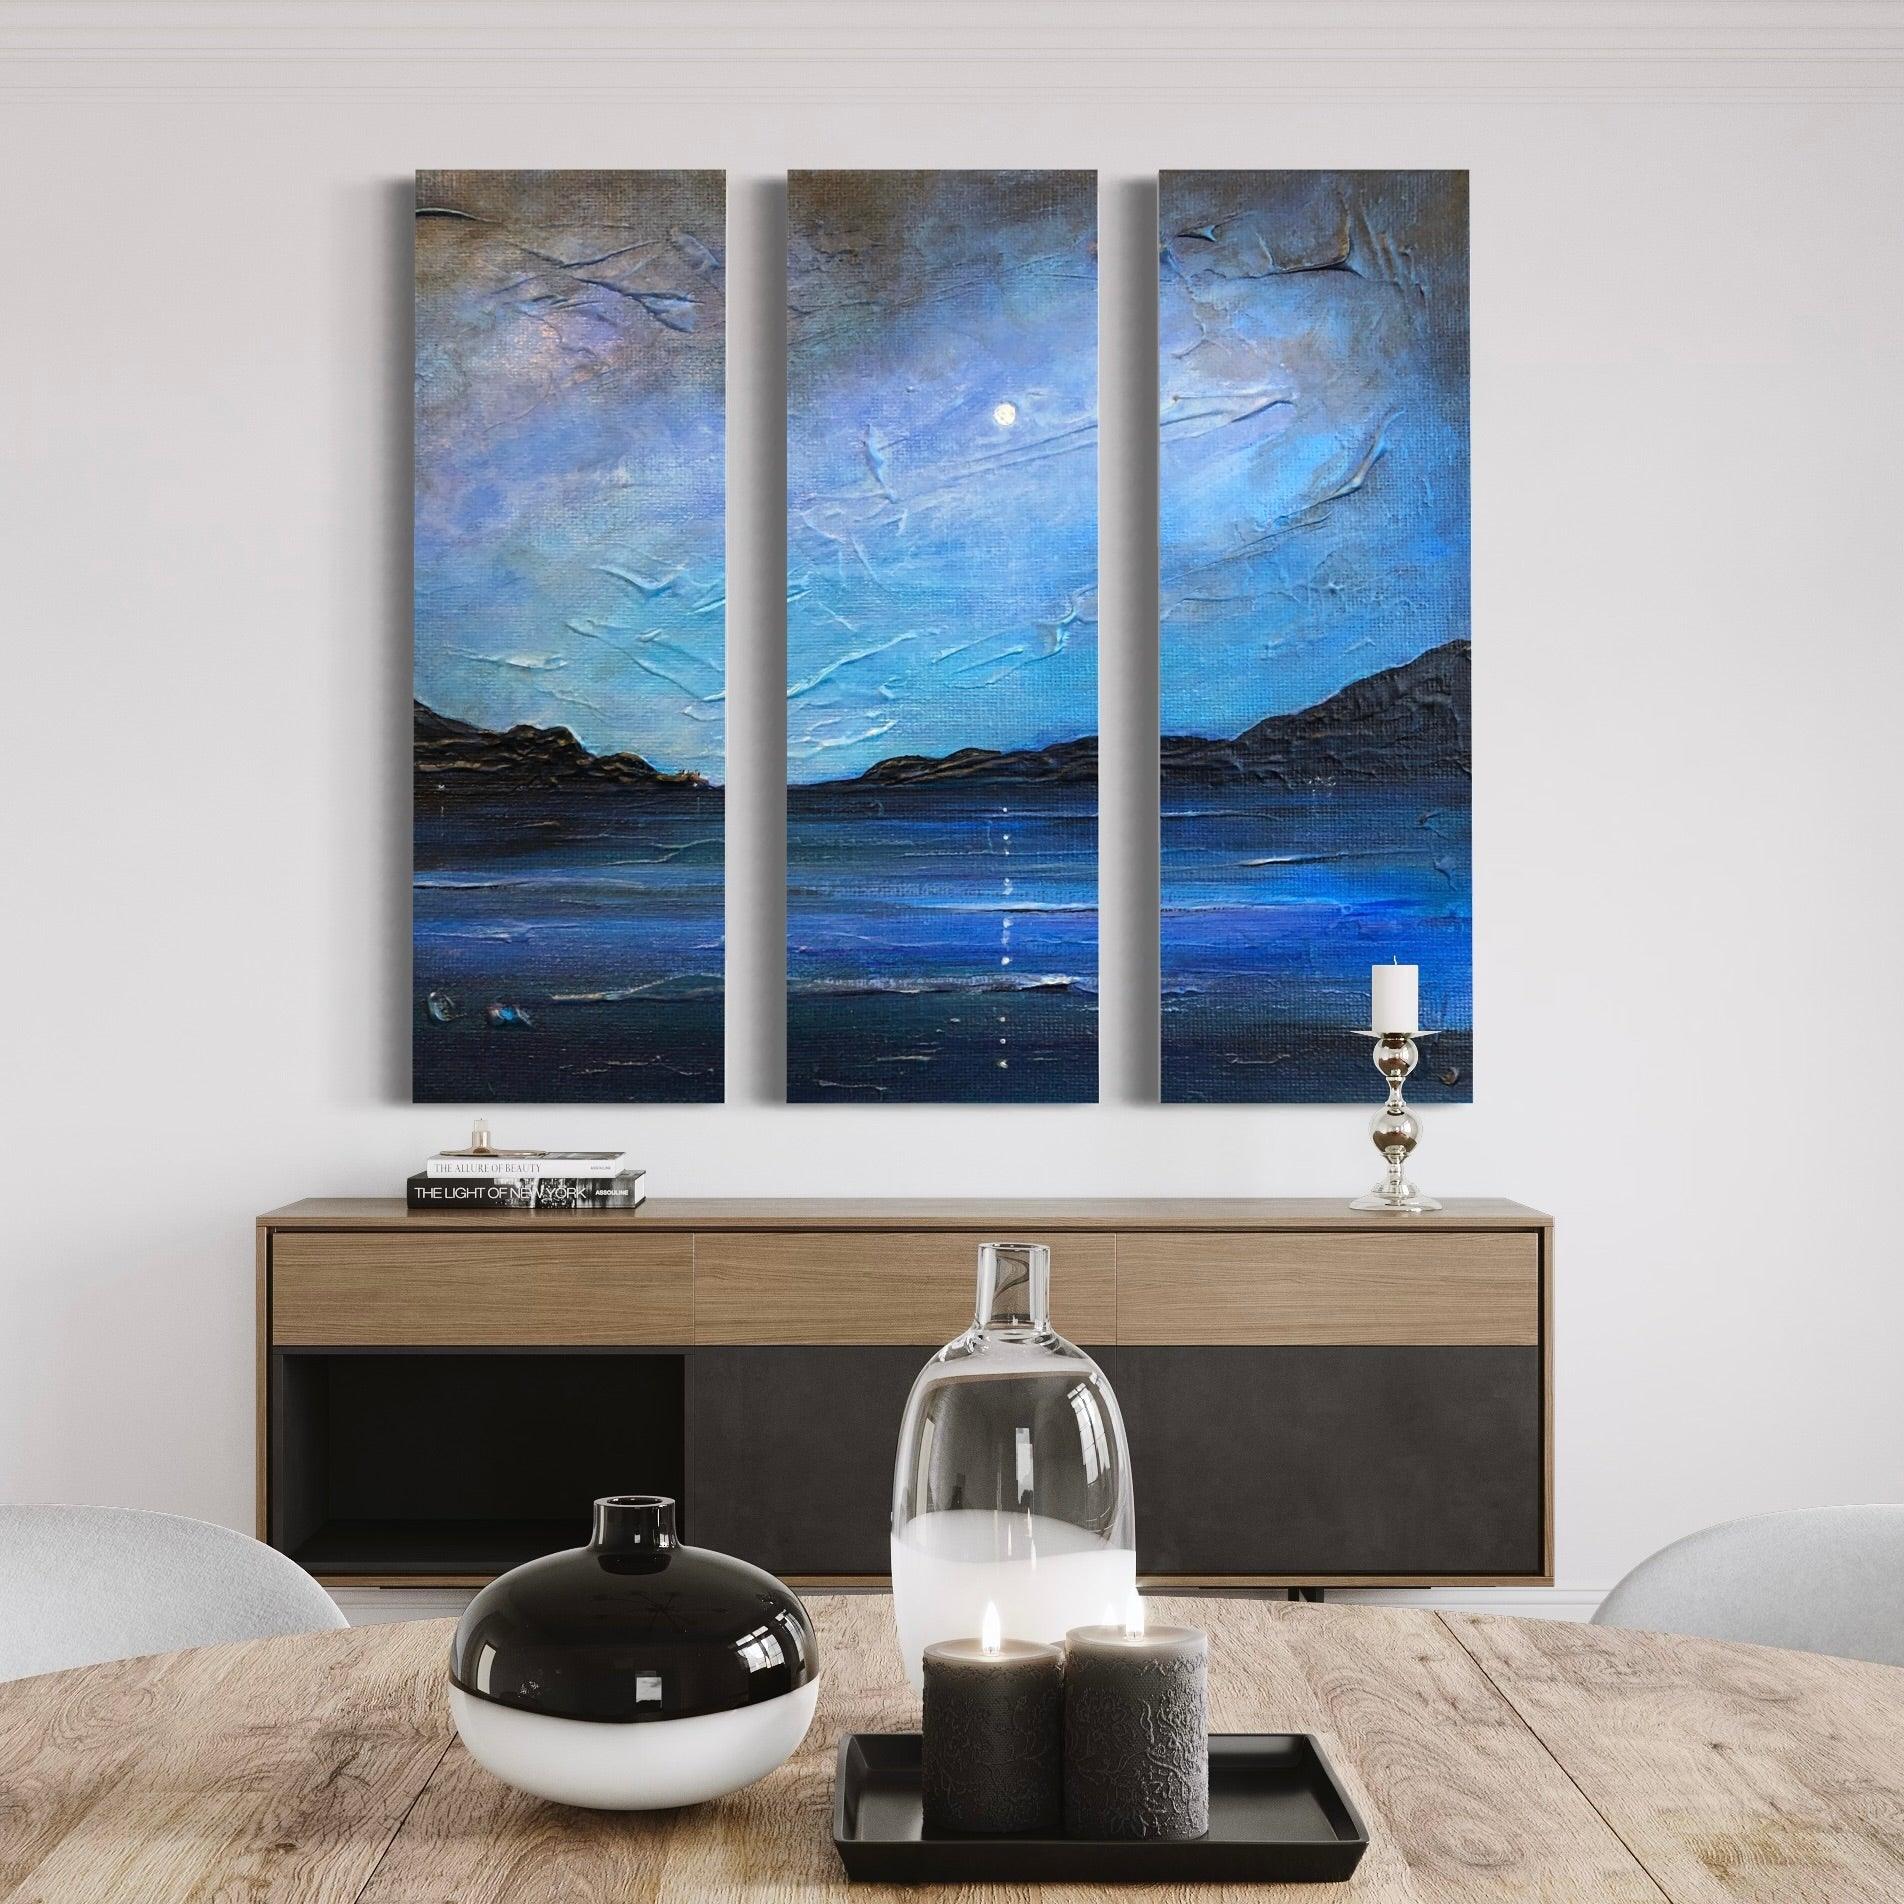 Loch Ness Moonlight Painting Signed Fine Art Triptych Canvas-Statement Wall Art-Scottish Lochs & Mountains Art Gallery-Paintings, Prints, Homeware, Art Gifts From Scotland By Scottish Artist Kevin Hunter